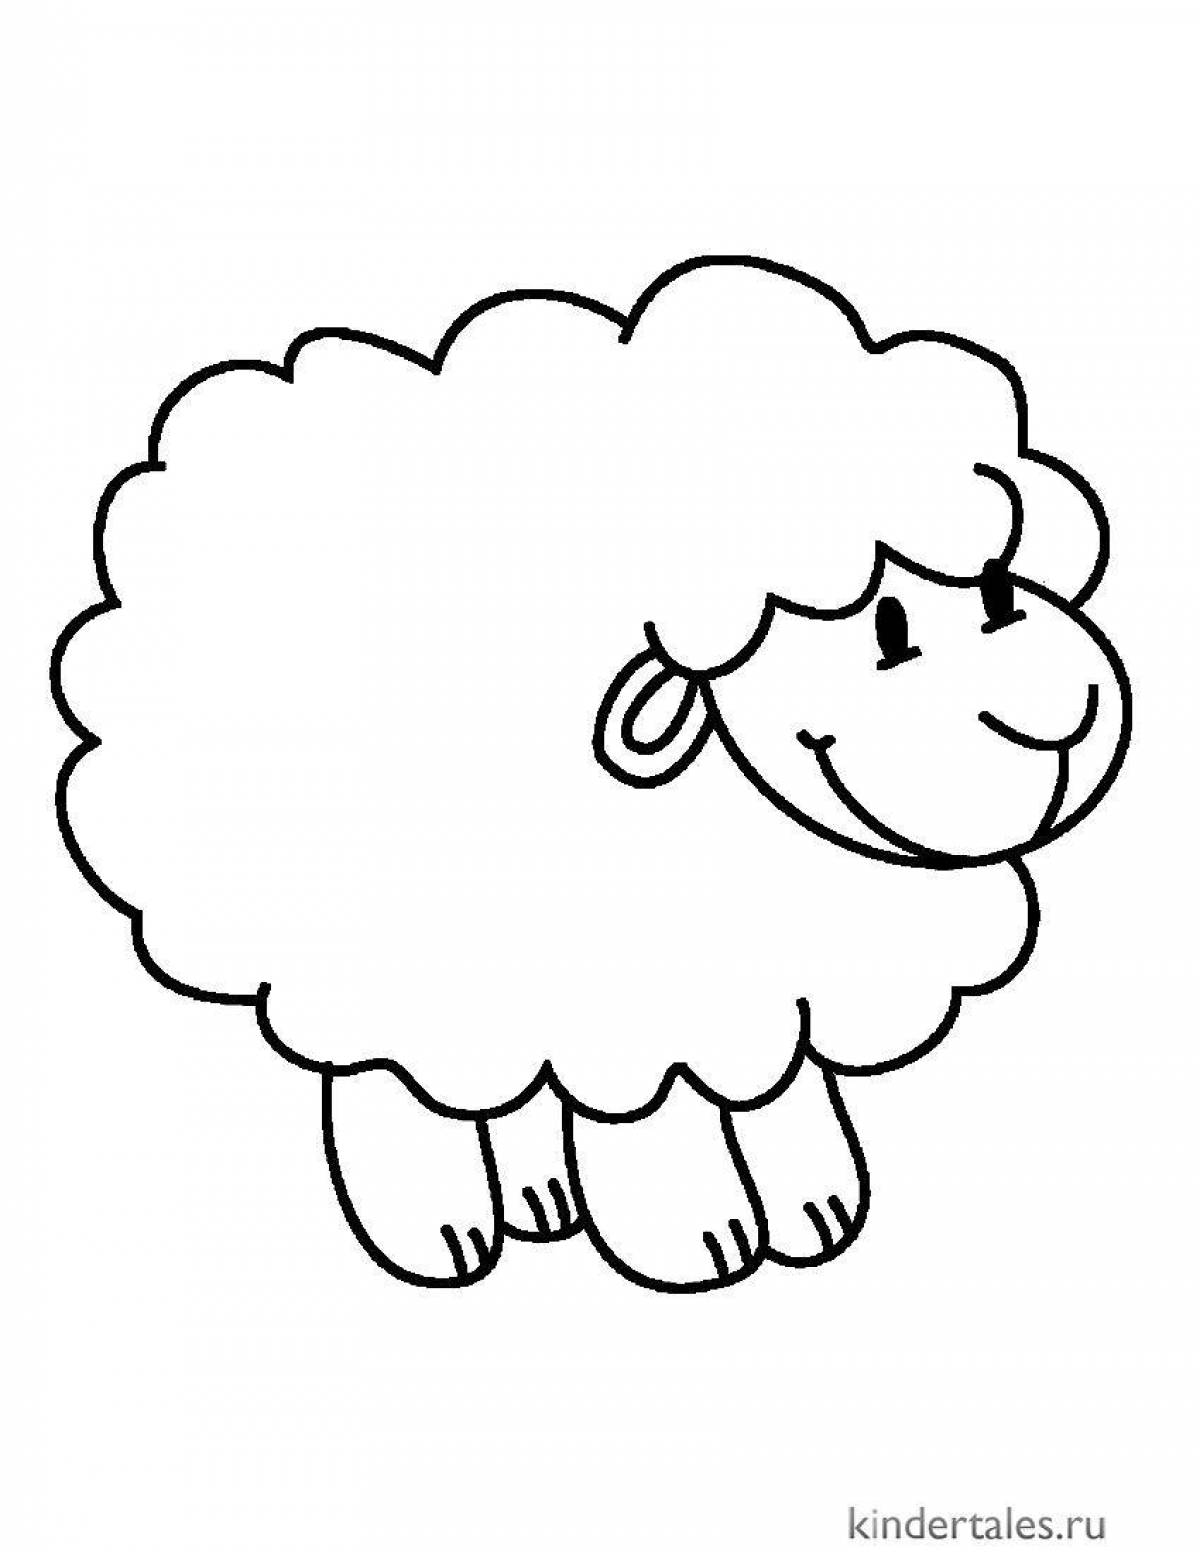 Glorious lamb coloring book for children 3-4 years old